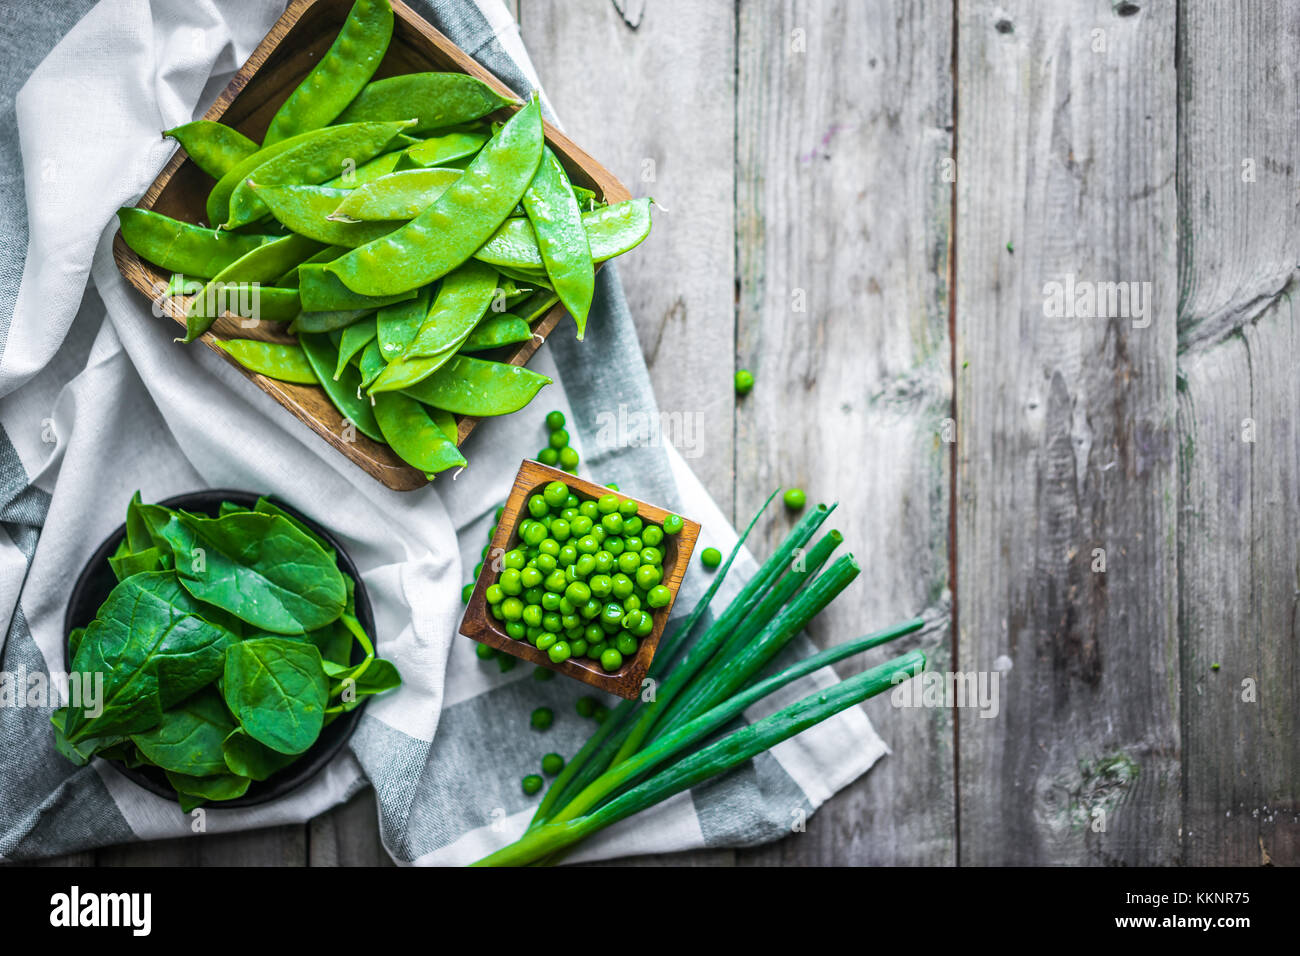 Green vegetables on wooden background Stock Photo